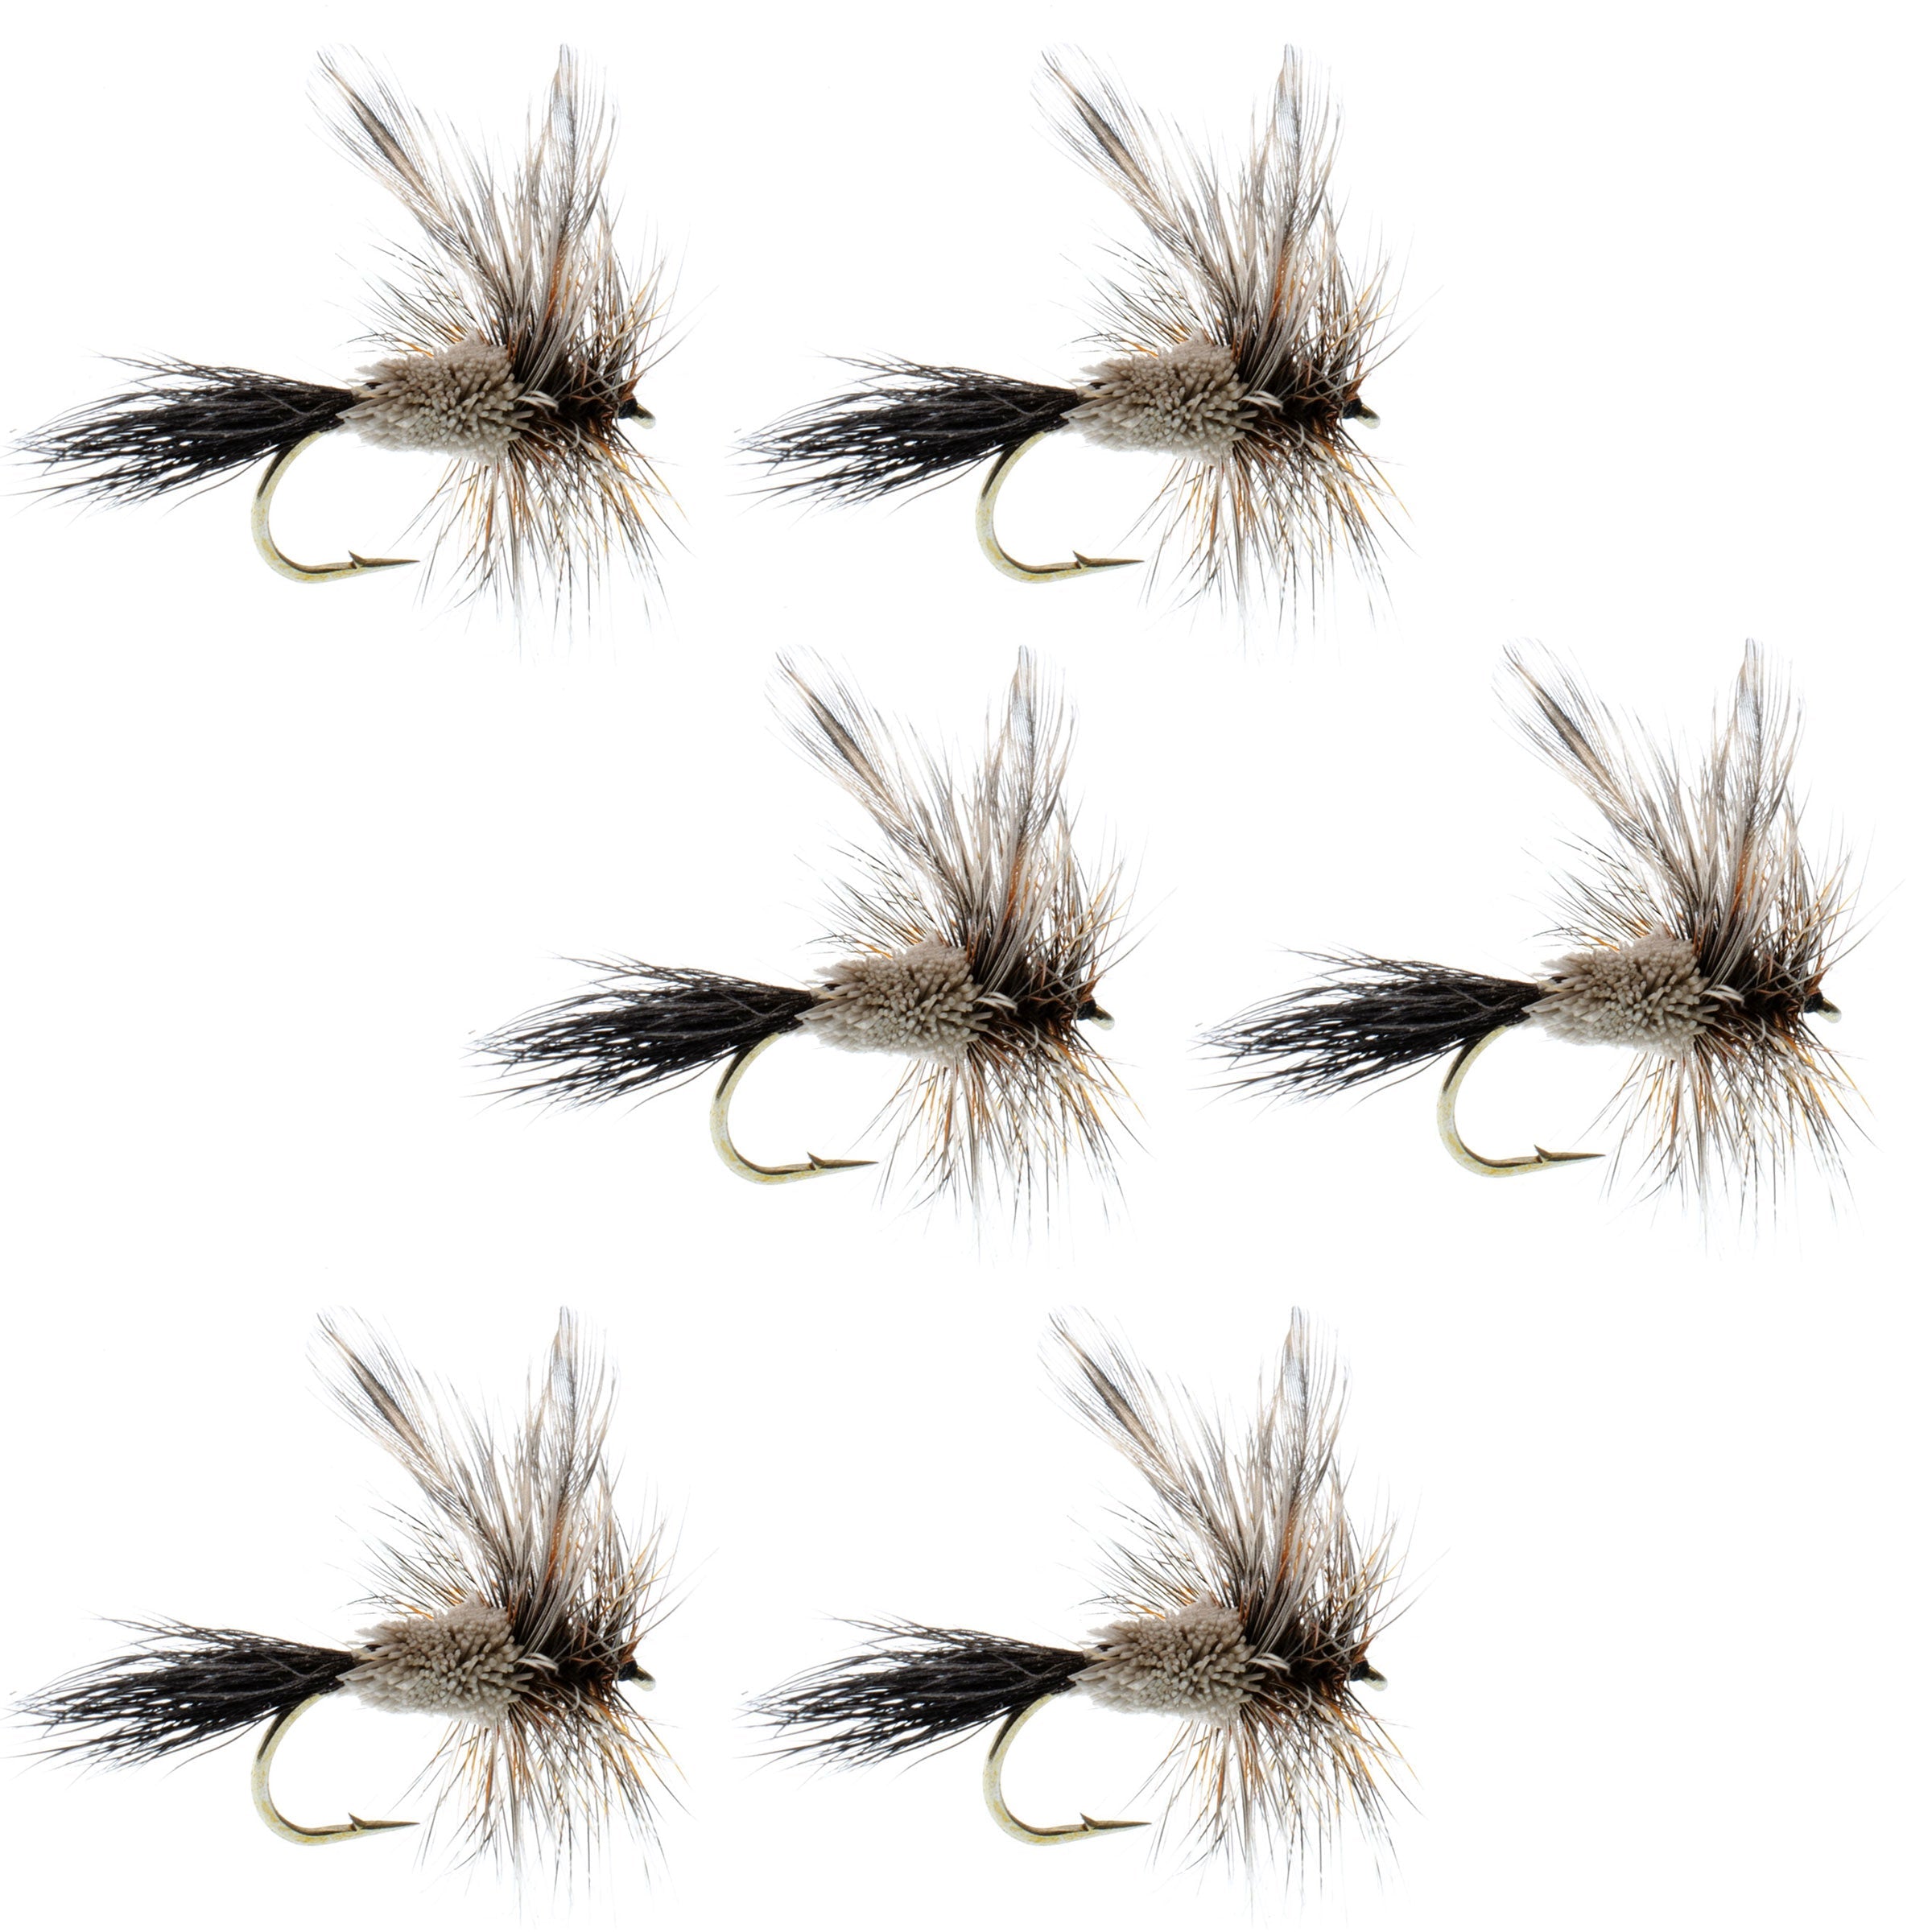 Adams Irresistible Classic Dry Fly - 6 Flies - Hook Size 12